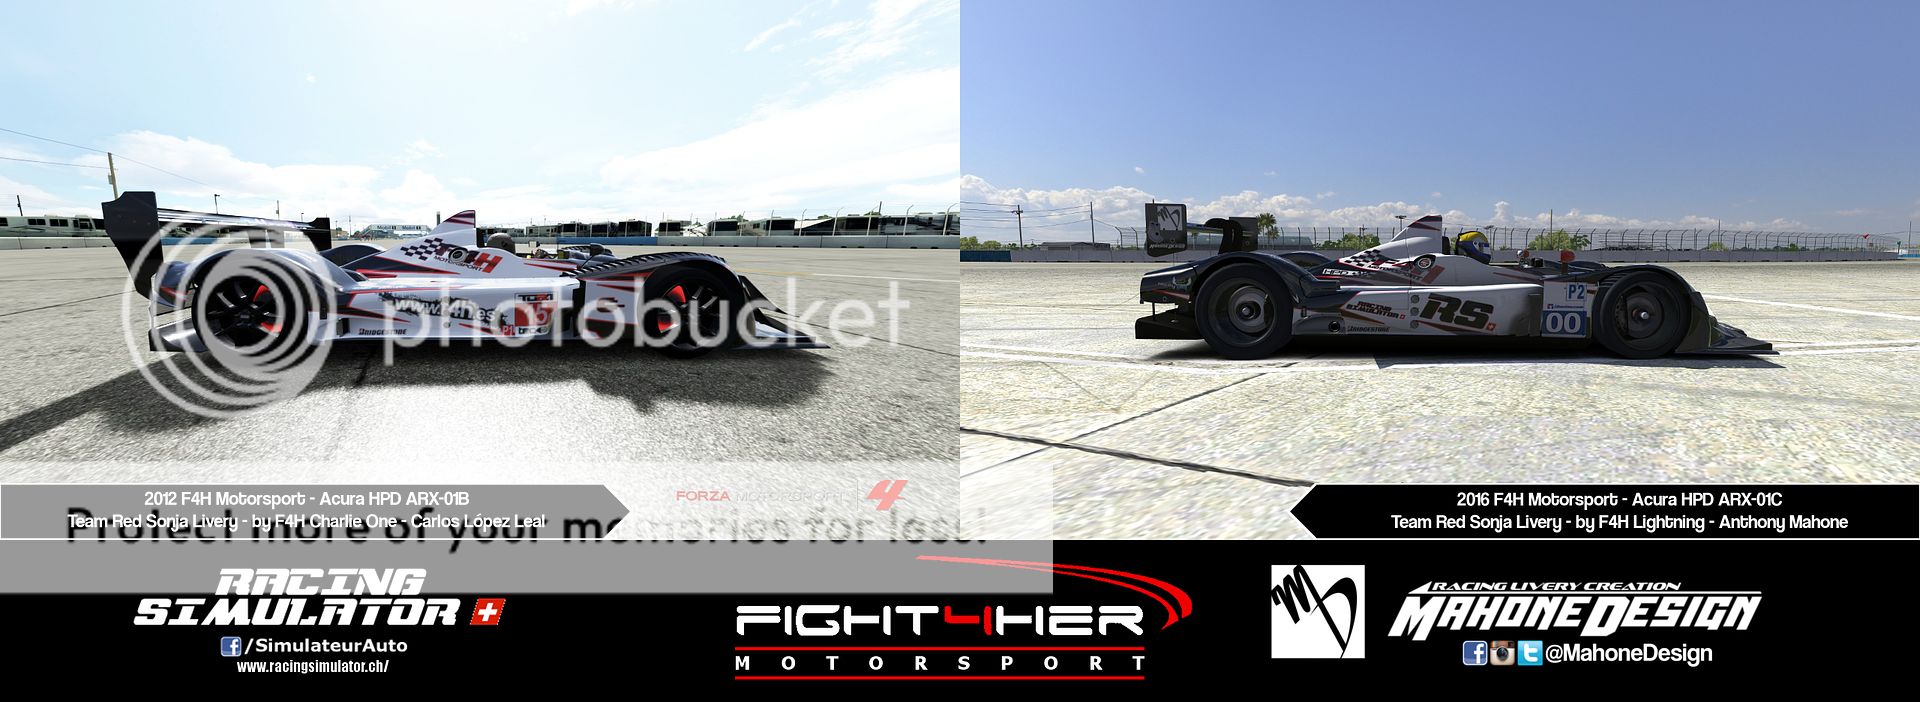 MahoneDesign - Racecar Livery Creation F4H%20Red%20Sonja%20Right